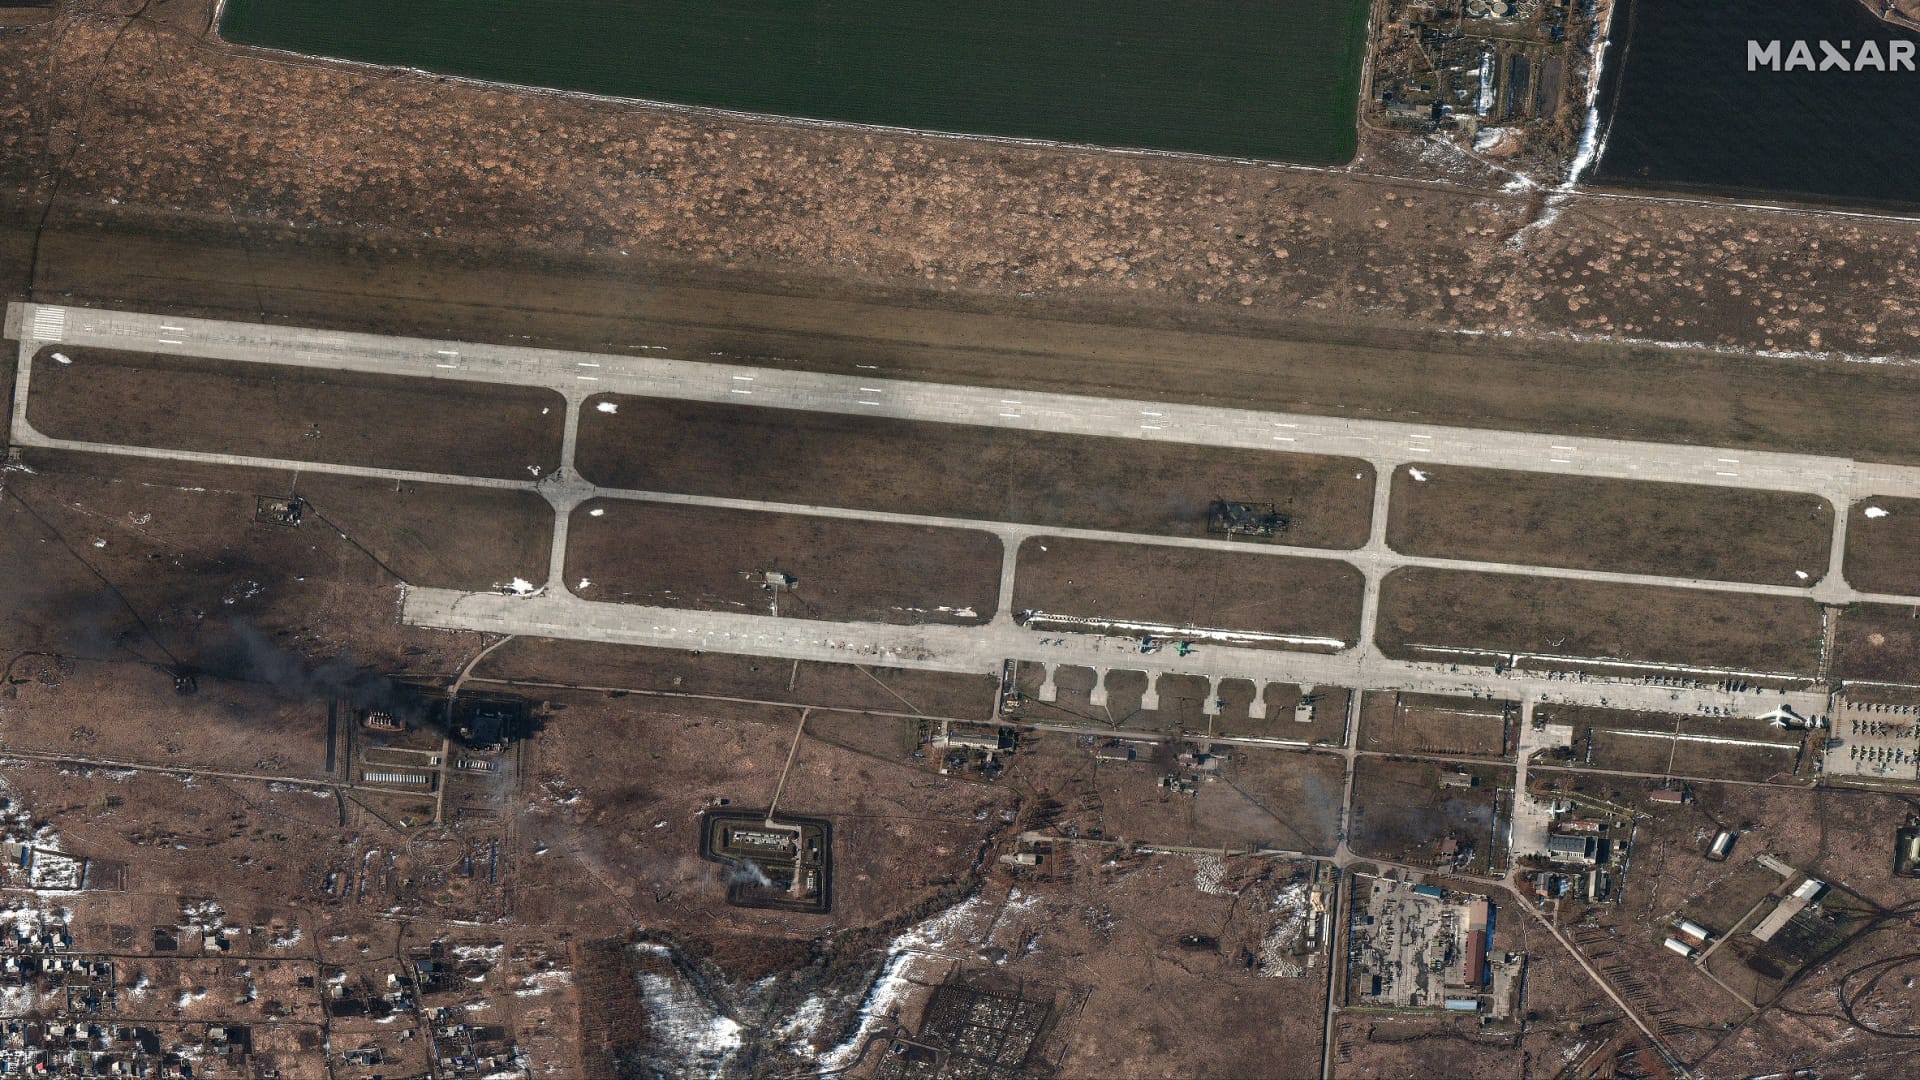 Satellite imagery captured on Feb. 24, 2022 reveals damage to fuel storage areas and other airport infrastructure at the Chuhuiv airfield.